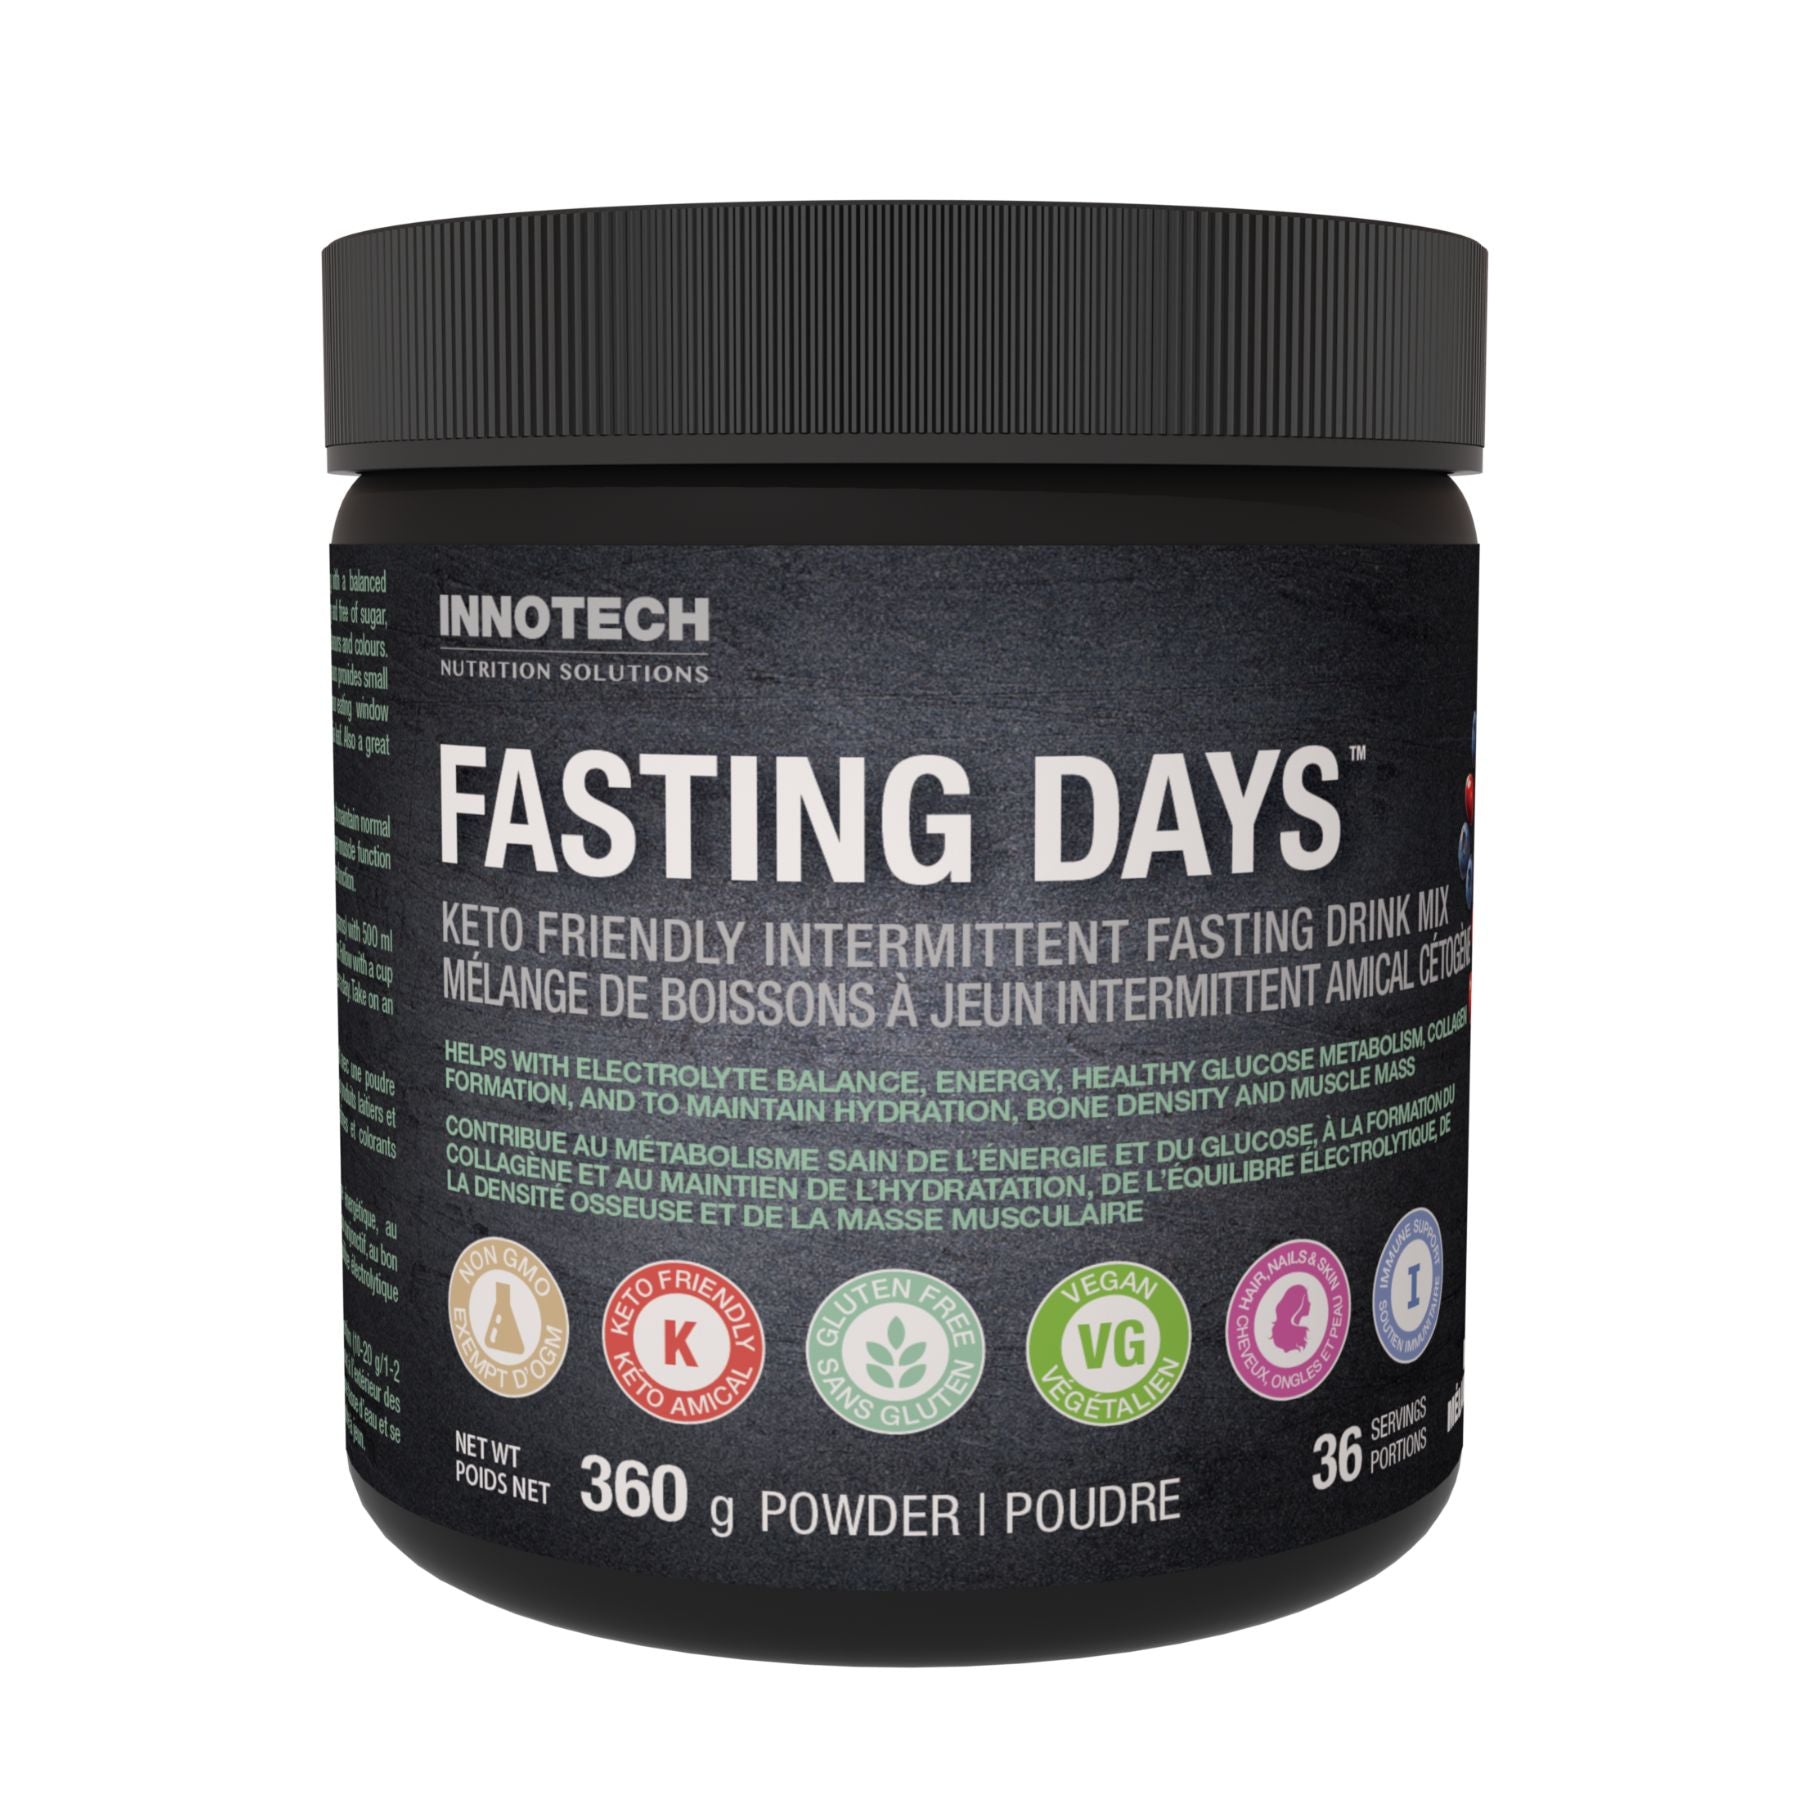 InnoTech Fasting Days - Mixed Berry 360g